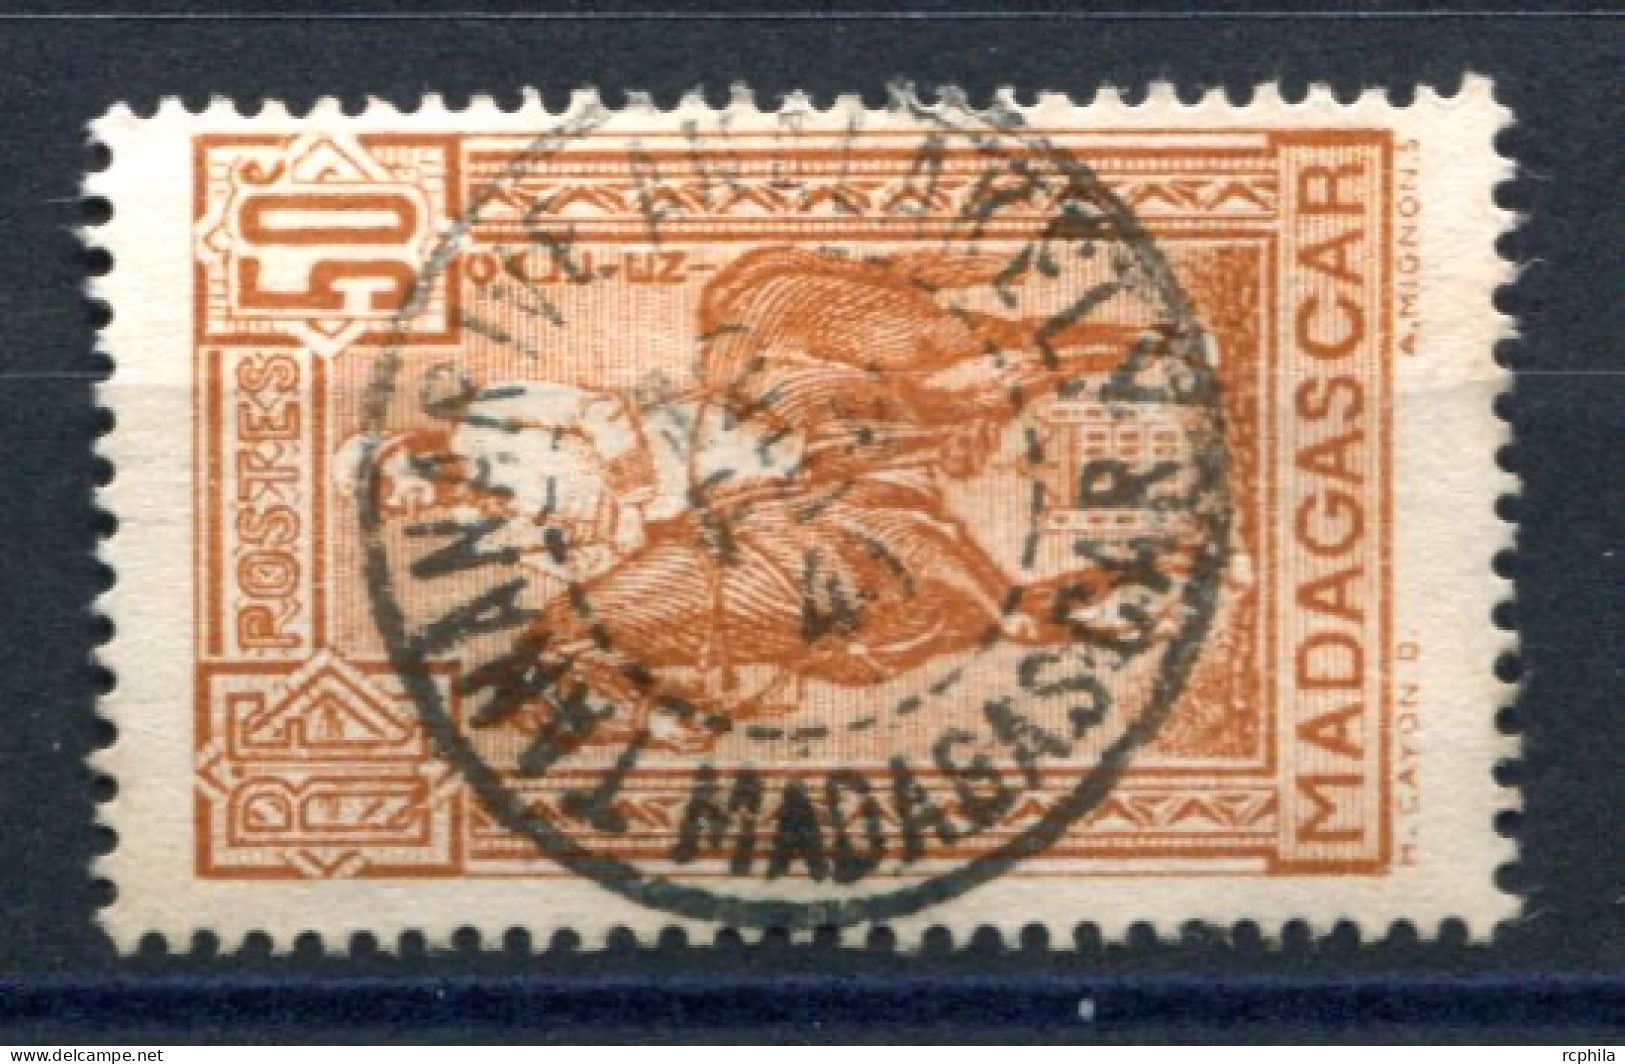 RC 26546 MADAGASCAR - TANANARIVE ANALAKELY BELLE OBLITÉRATION DE 1940 TB - Used Stamps